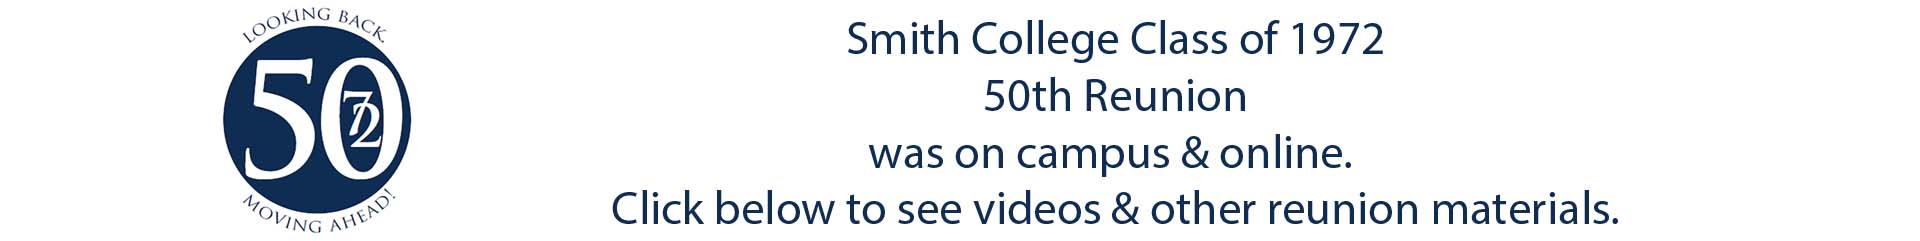 Smith College Class of 1972